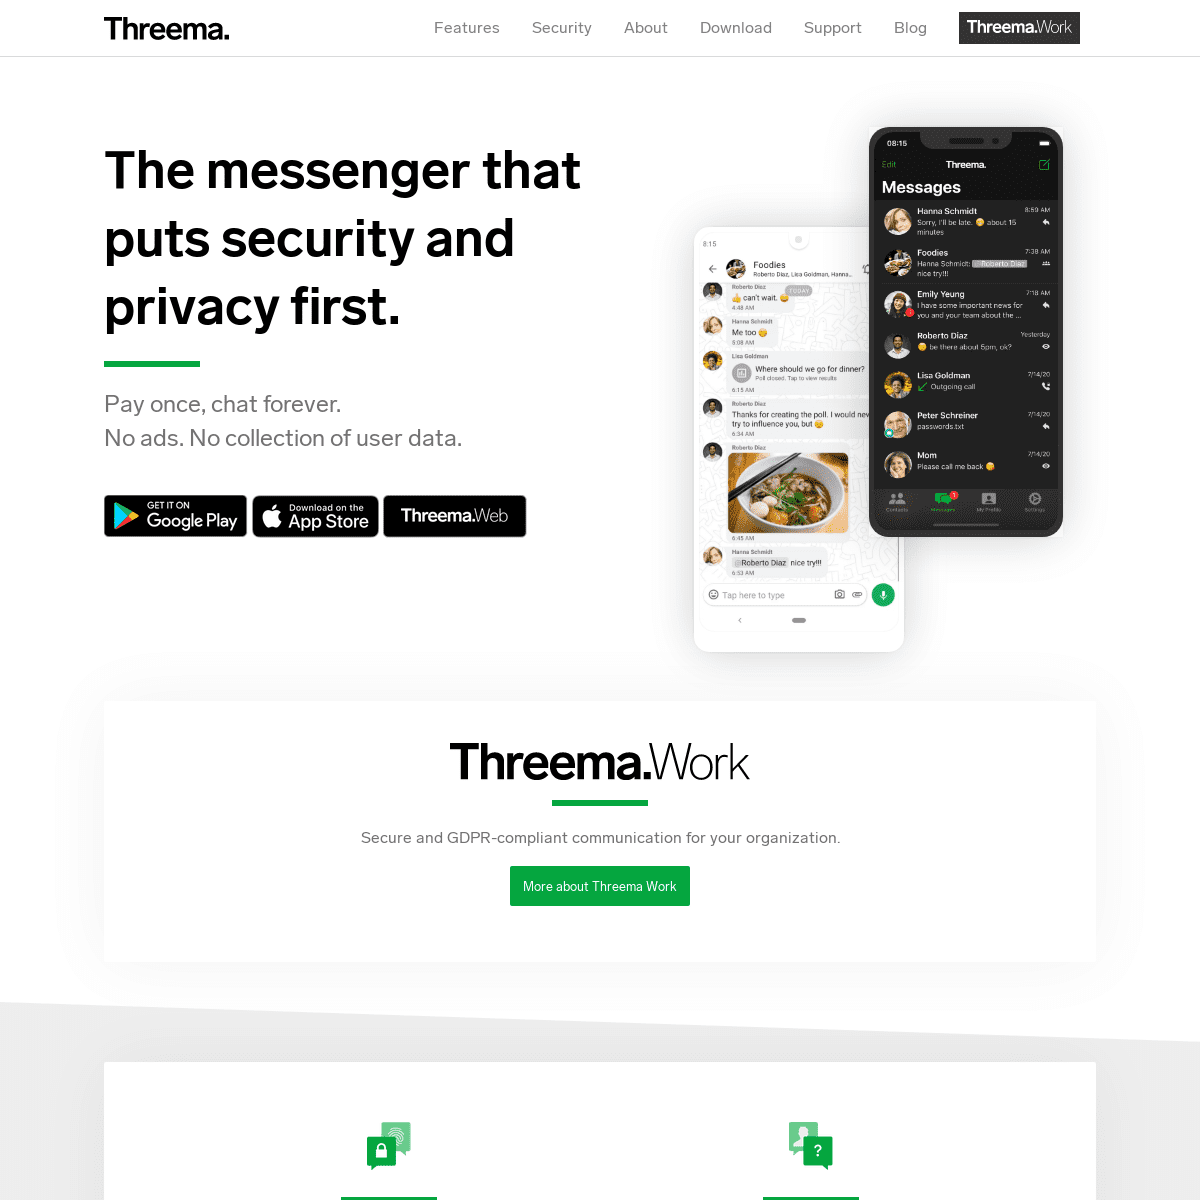 A complete backup of threema.ch